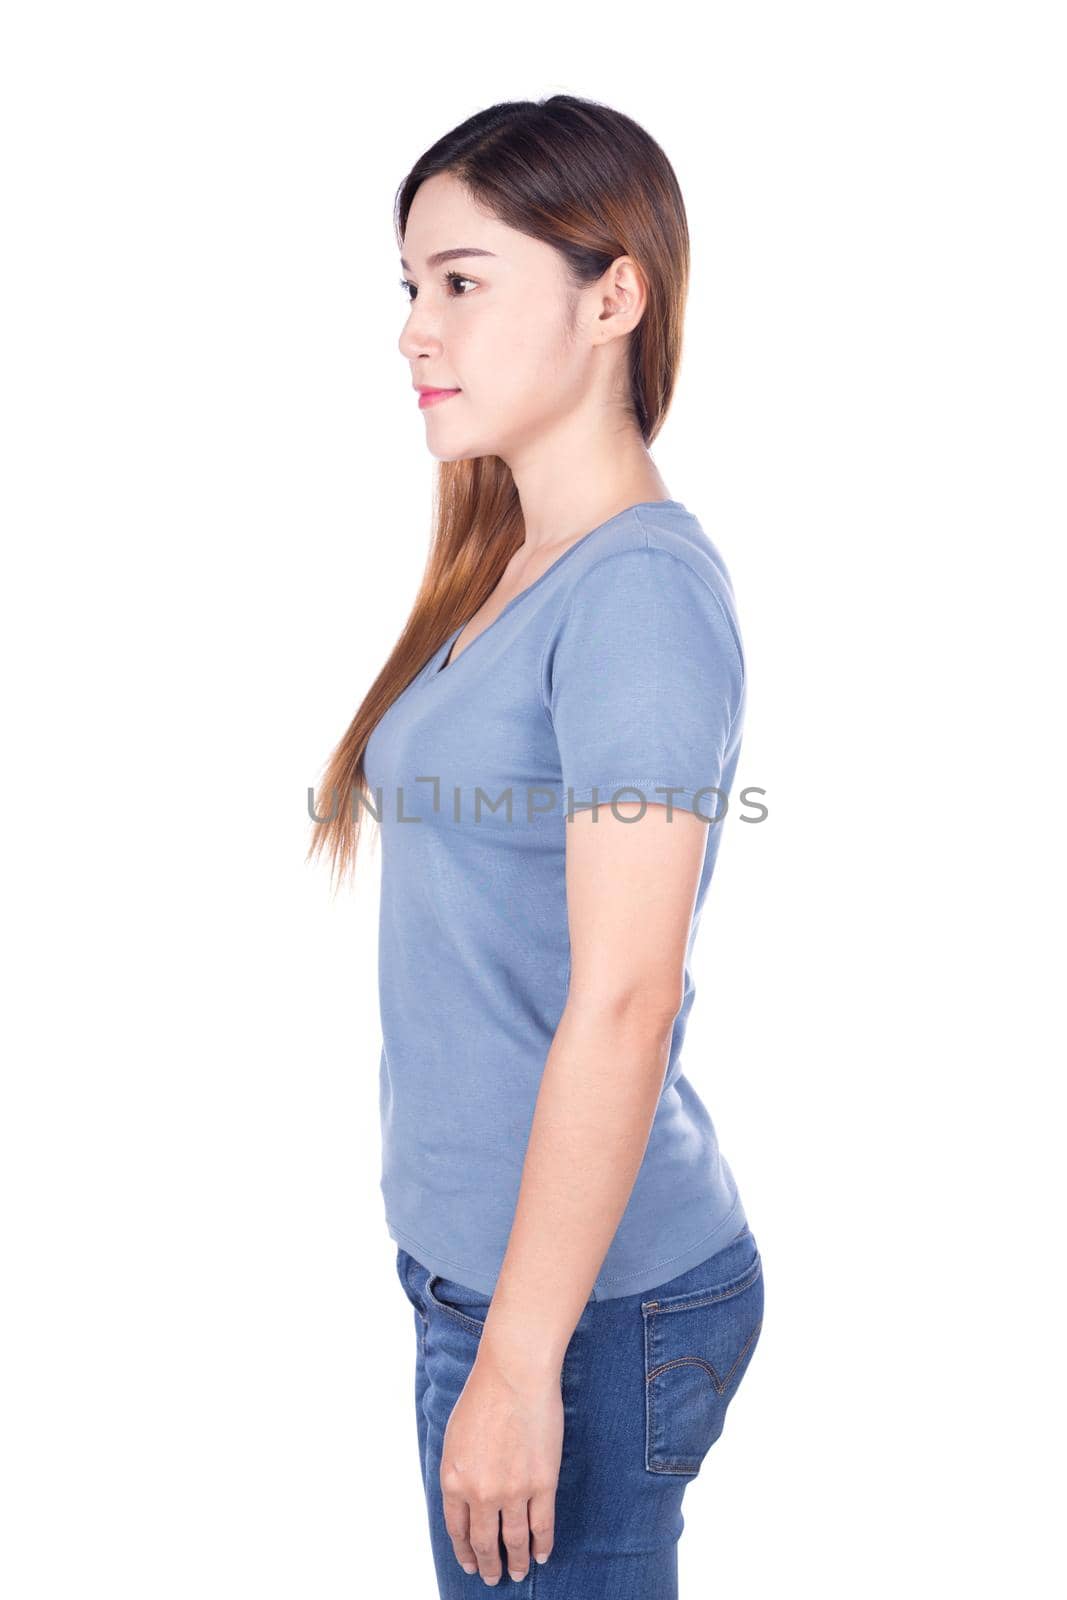 woman in blue t-shirt isolated on white background (side view) by geargodz